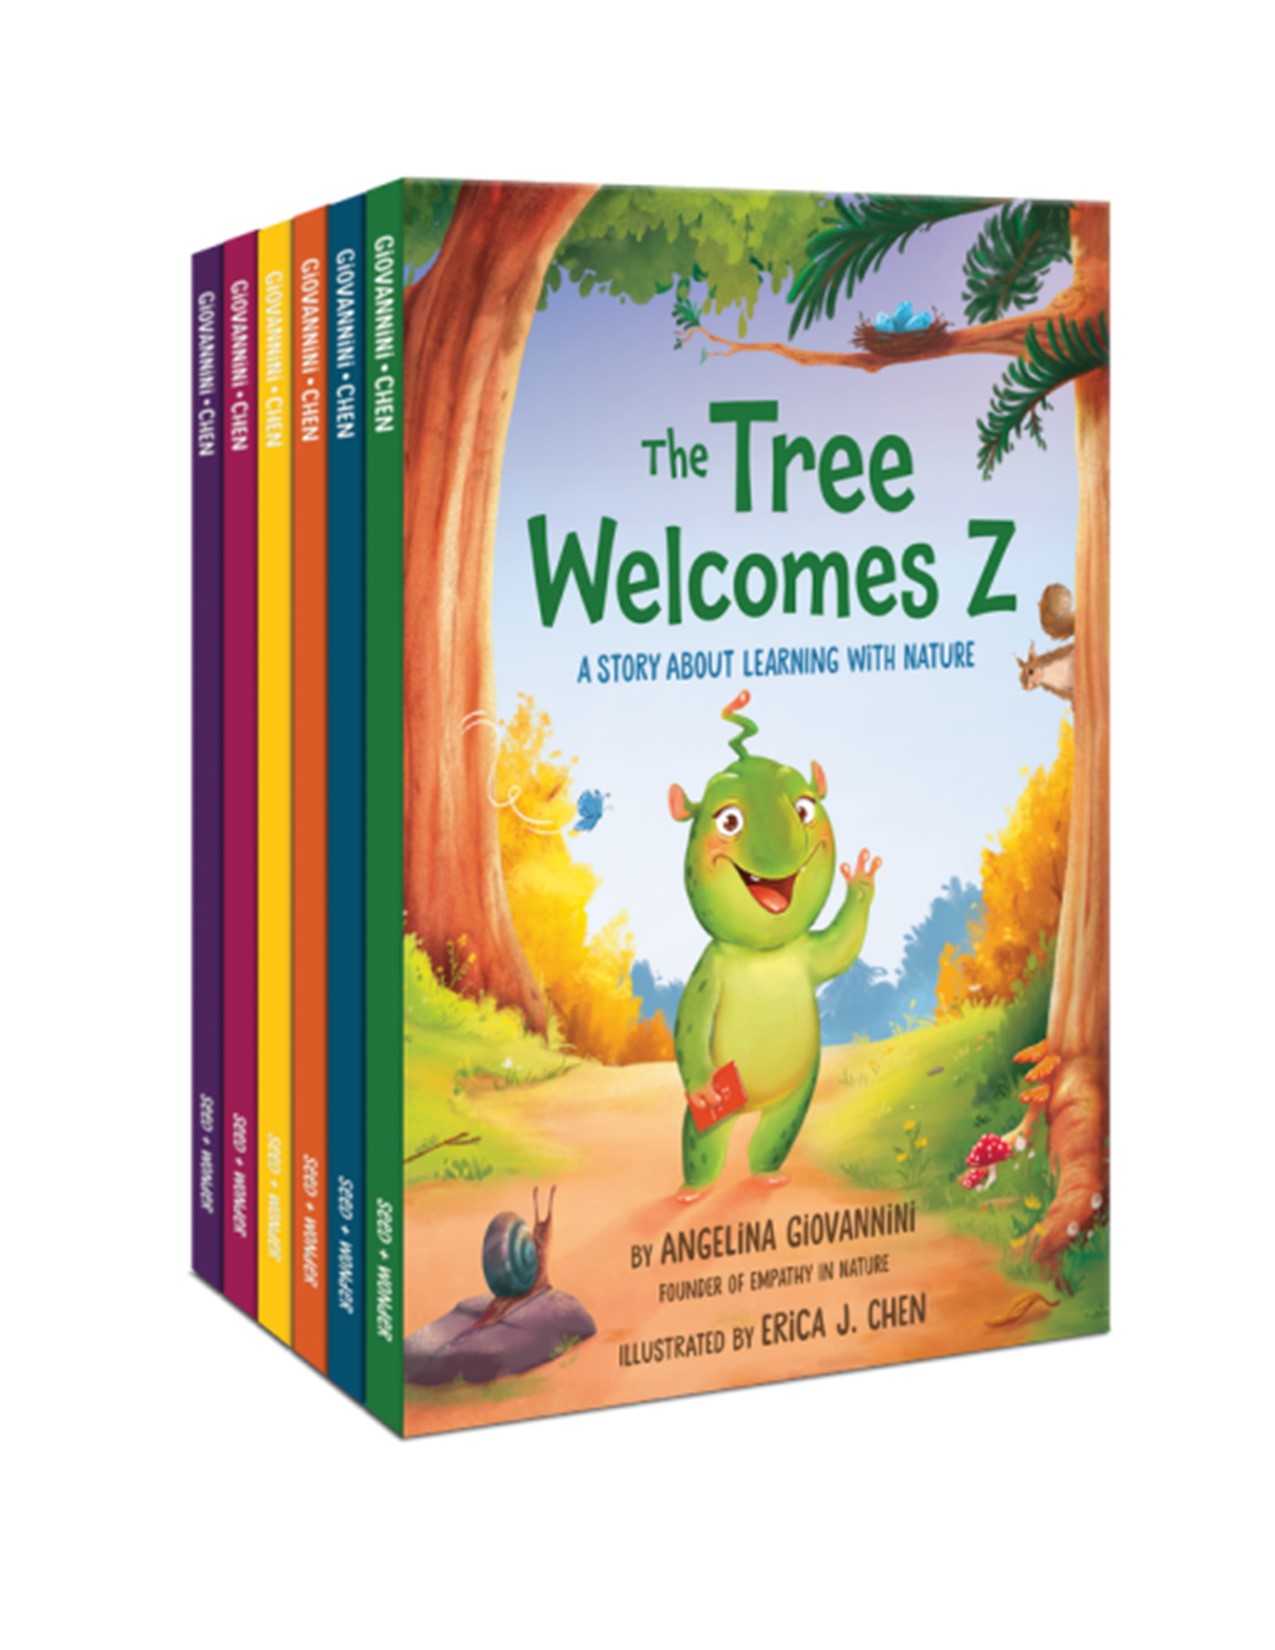 The Tree Welcomes Z book cover